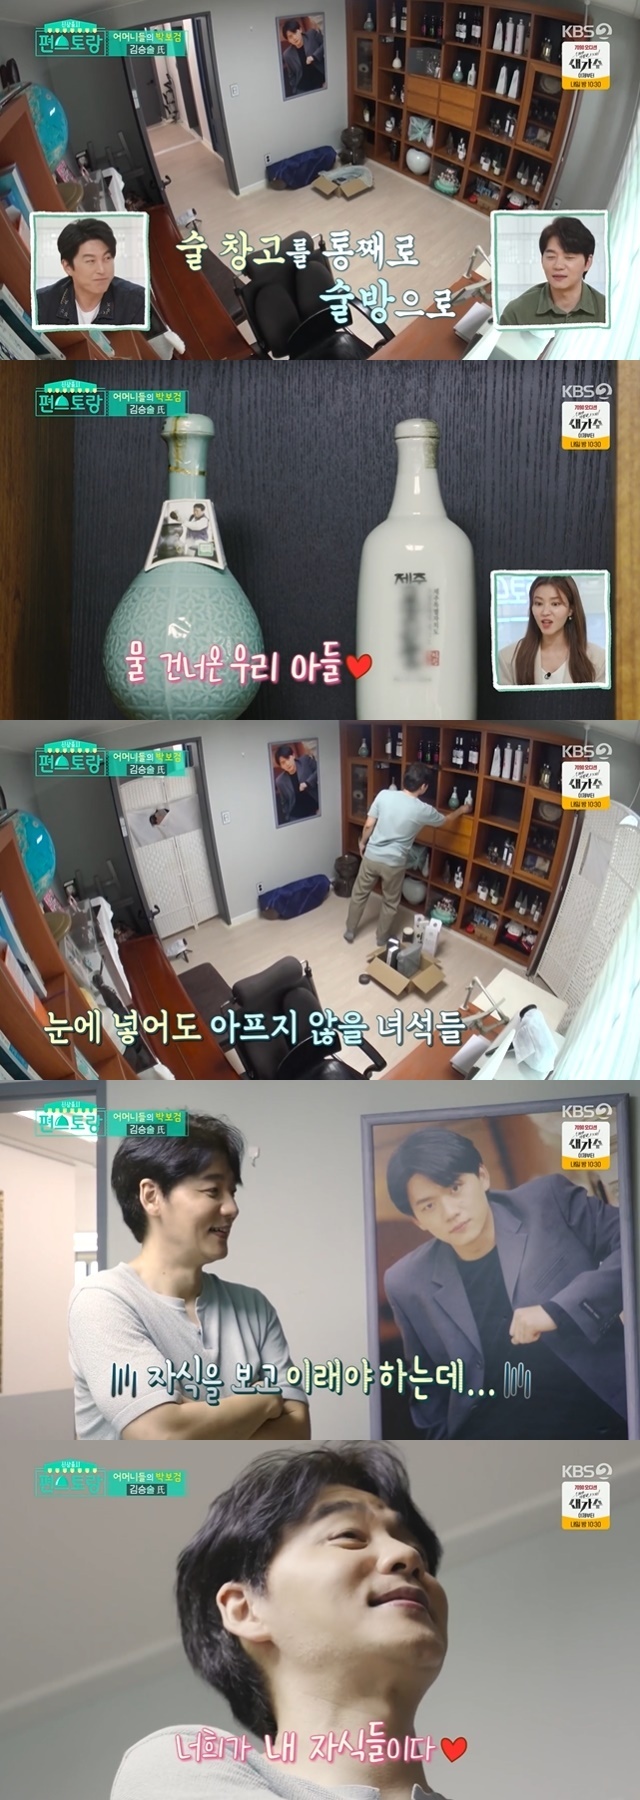 Actor Kim Seung-soo filled up a room of alcohol and revealed his extraordinary affection.In the 93rd KBS 2TV entertainment Stars Top Recipe at Fun-Staurant (hereinafter referred to as Stars Top Recipe at Fun-Staurant) broadcast on August 27, the complete middle-aged Actor Kim Seung-soo challenged the chef on the theme of K-food.On this day, Kim Seung-soo unveiled a new liquor room at the house where he moved.Kim Seung-soo, who had built a liquor storehouse in a pantry in his previous home, filled one room with alcohol this time, explaining that he had made it a liquor store because there are some rooms left.Kim Seung-soo added a new traditional wine to his bookshelf full of alcohol this day: This is a drink that has come across. My son who has crossed the water.I am proud of it, he said, almost as if he was dealing with his child.